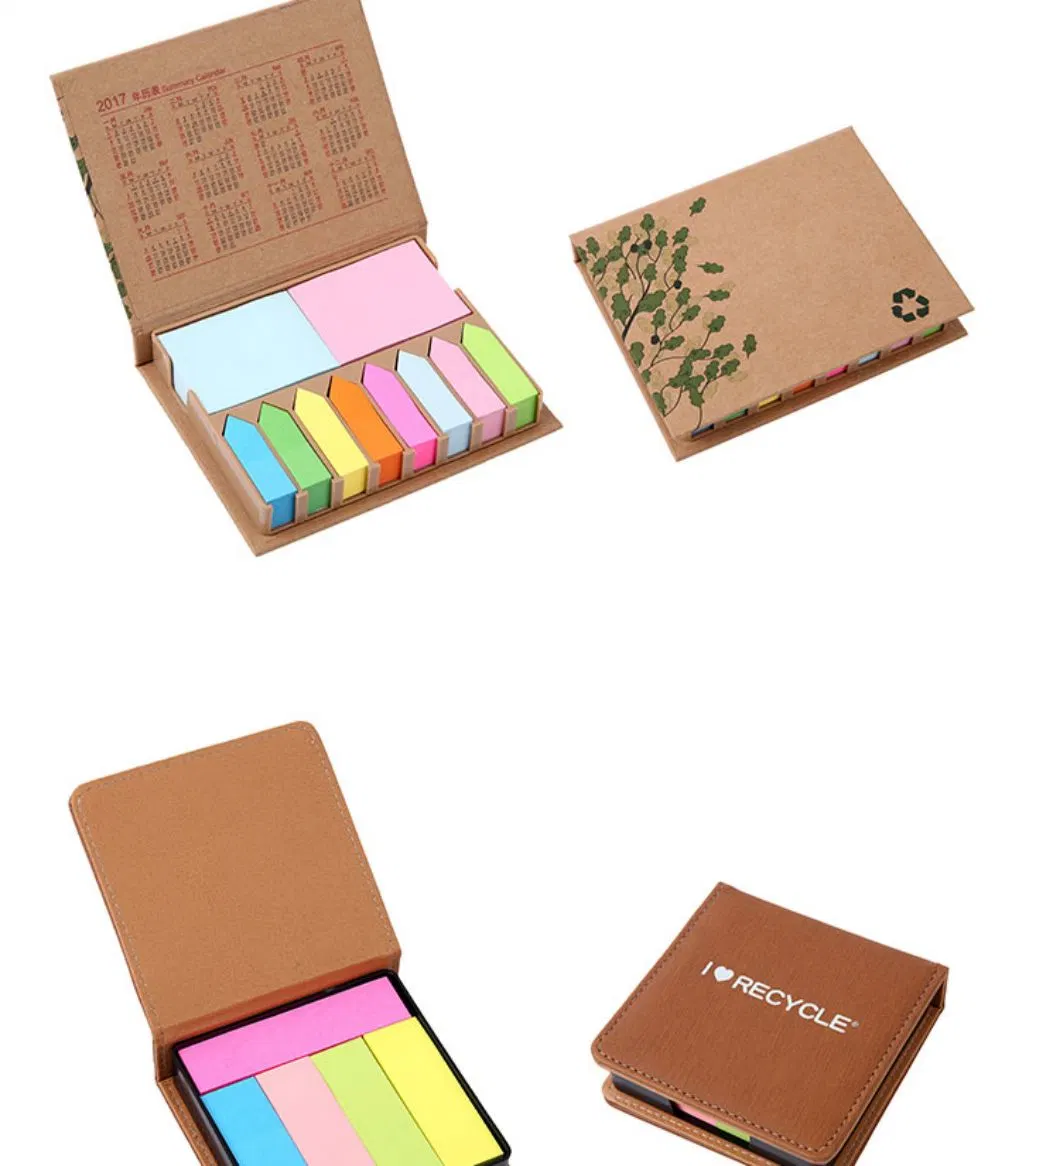 Professional Manufacturers Custom Office Desktop Combined Type Sticky Notes Eco Friendly Cube Memo Pad Box with Pen Holder